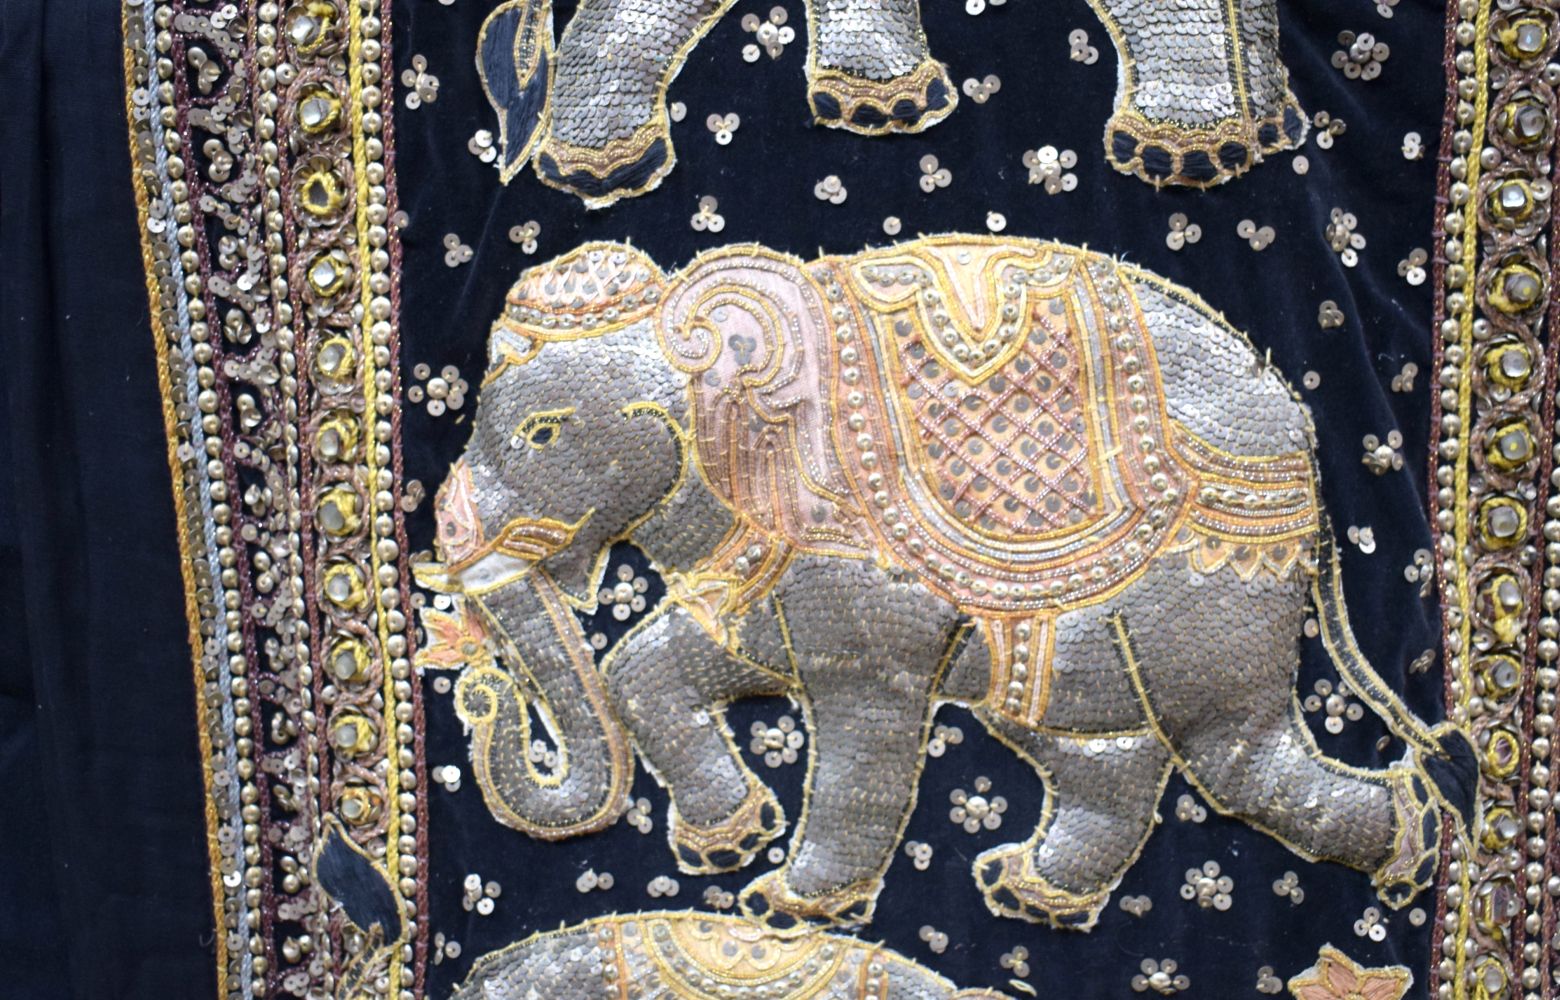 An Embroidered South East Asian Elephant wall hanging 104 x 60 cm. - Image 10 of 12